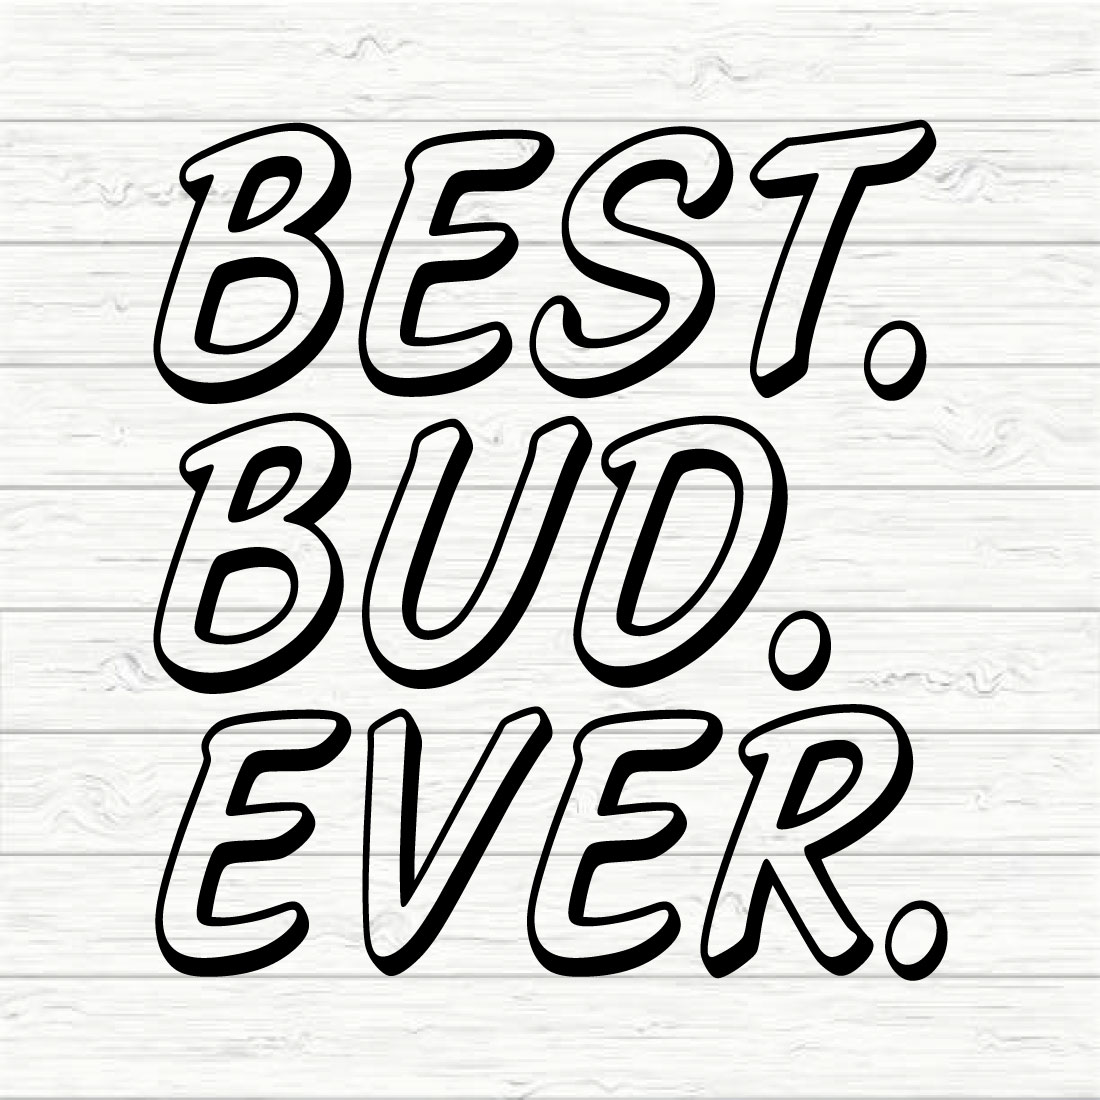 Best bud ever cover image.